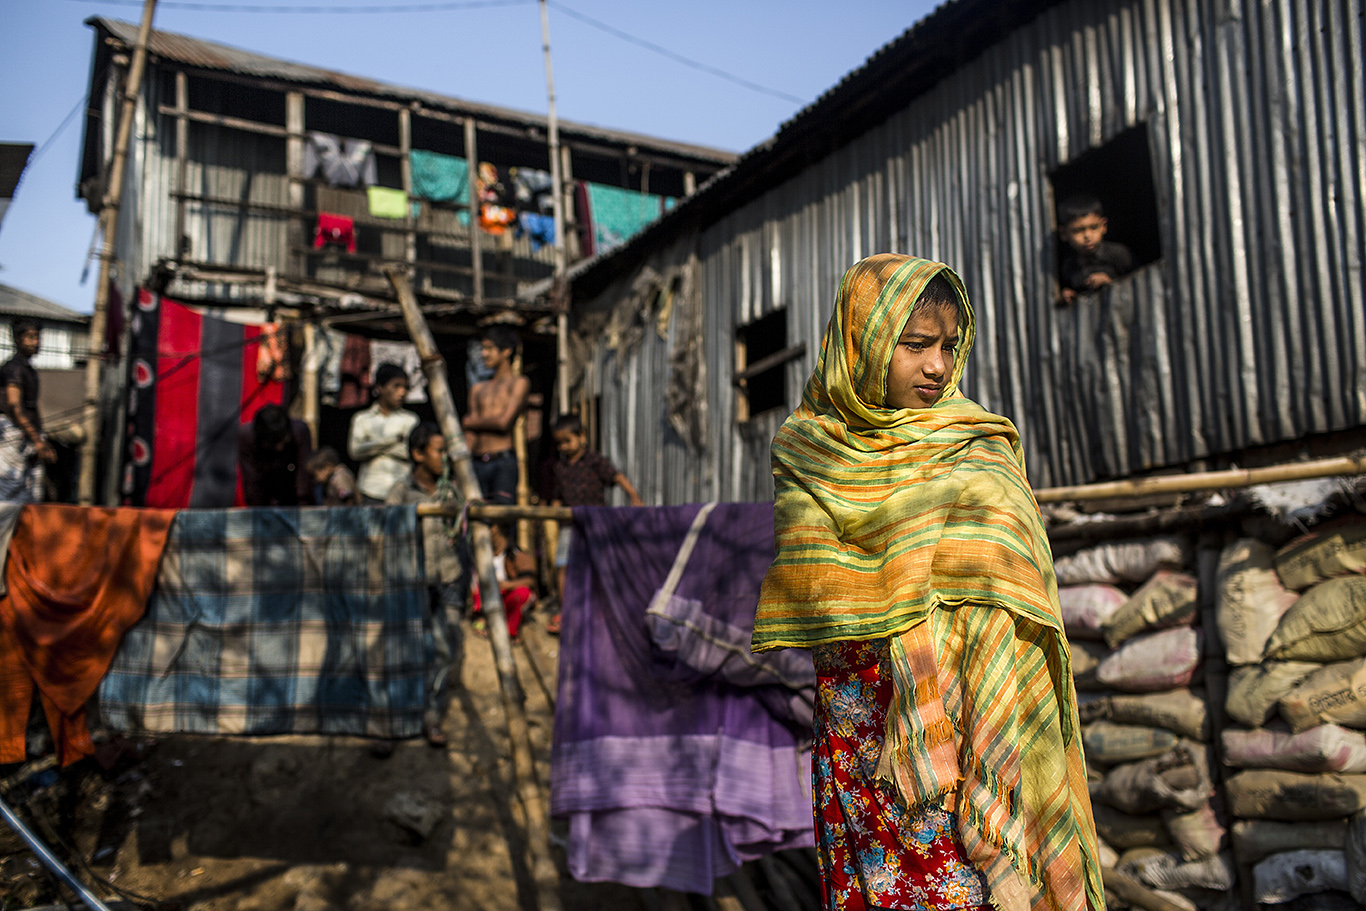 A thoughtful girl is seen in the Korail slum of Dhaka, Bangladesh. Korail Bosti is the largest slum in Dhaka, and the slum dwellers live under constant threat of eviction by the competent authorities. Dhaka has been named, according to several reports, the worst city in the world to live in.